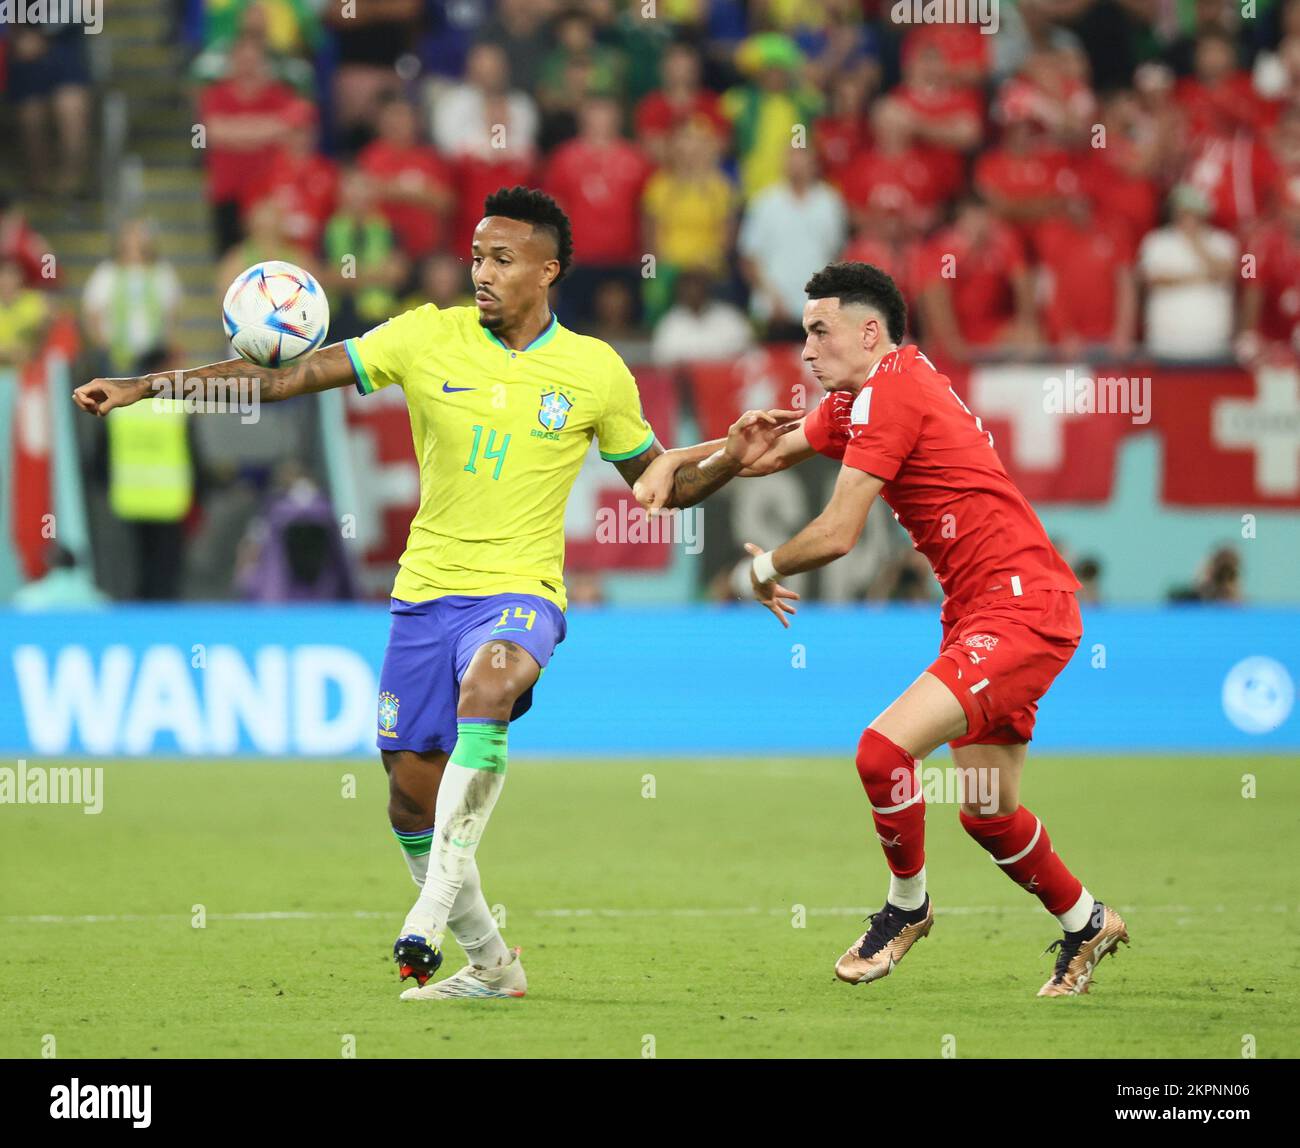 Doha, Qatar. 28th Nov, 2022. Eder Militao (L) of Brazil competes during the Group G match between Brazil and Switzerland at the 2022 FIFA World Cup at Ras Abu Aboud (974) Stadium in Doha, Qatar, Nov. 28, 2022. Credit: Lan Hongguang/Xinhua/Alamy Live News Stock Photo